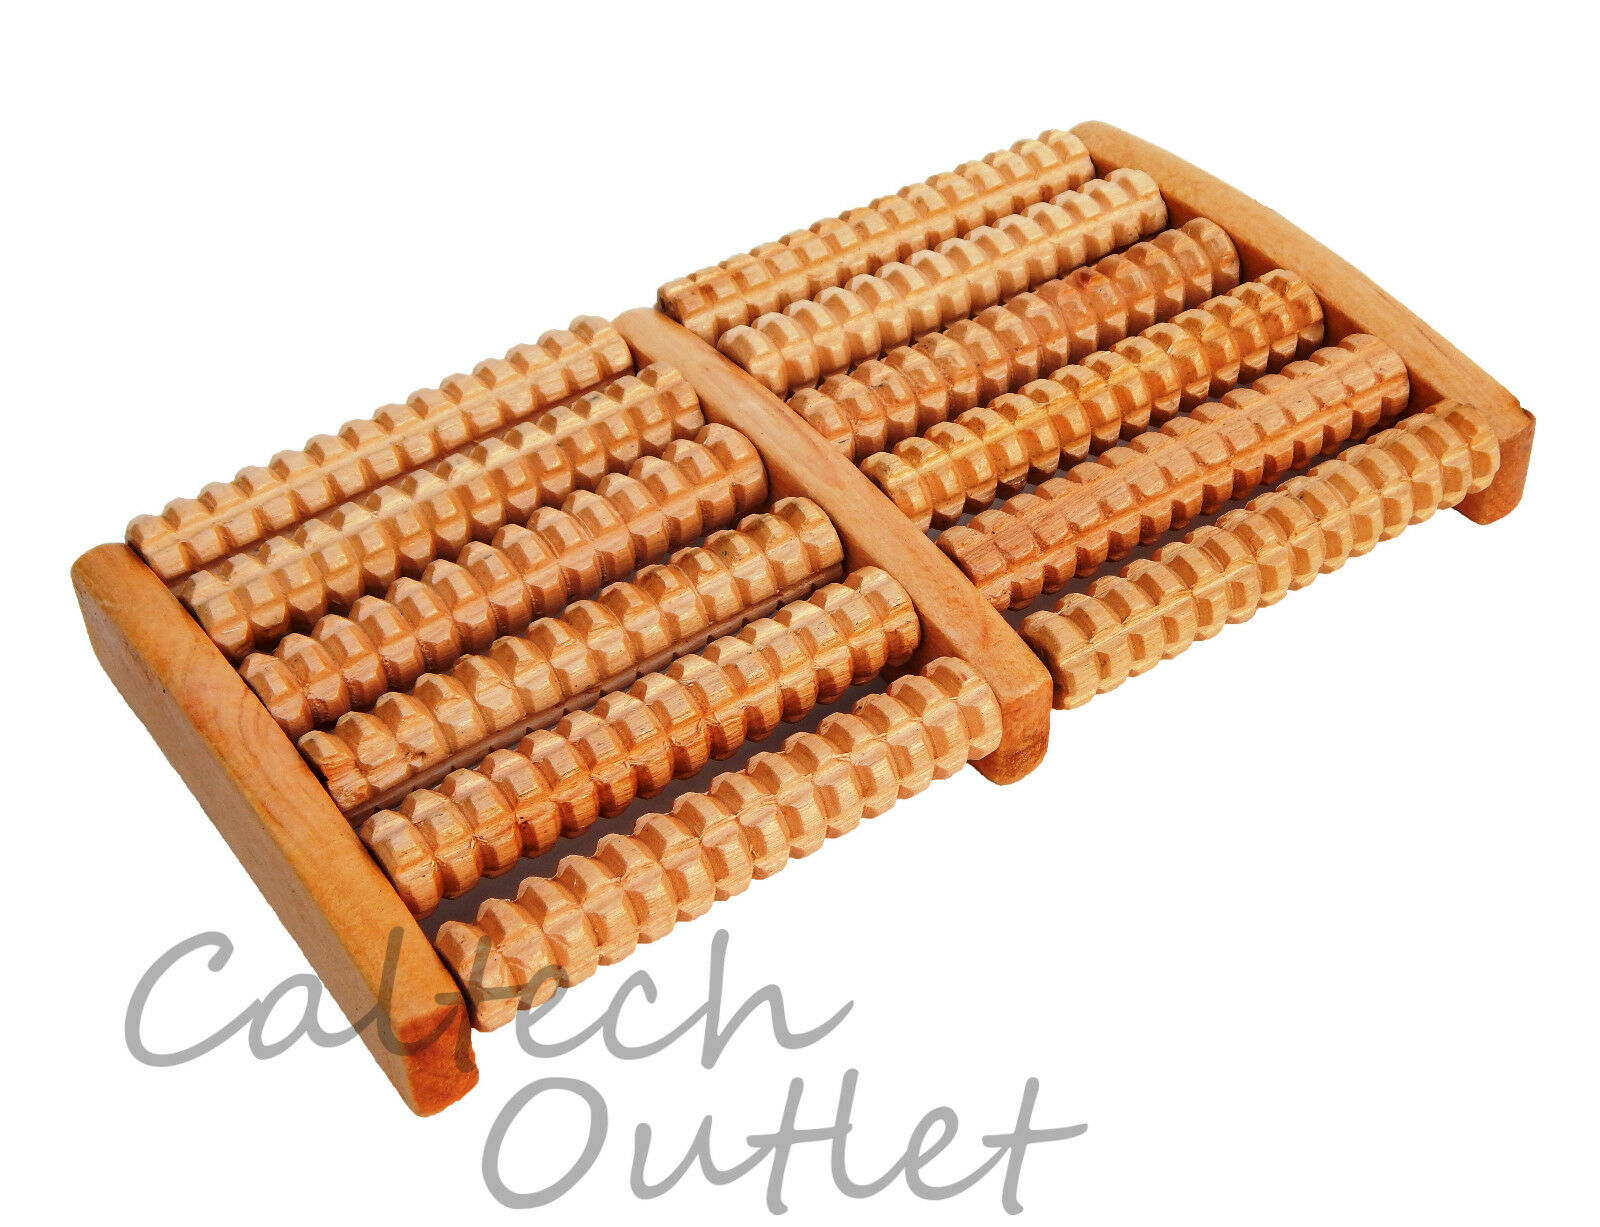 6 Raw Wooden Wood Roller Foot Massager Stress Relief Healththerapy Relax Massage